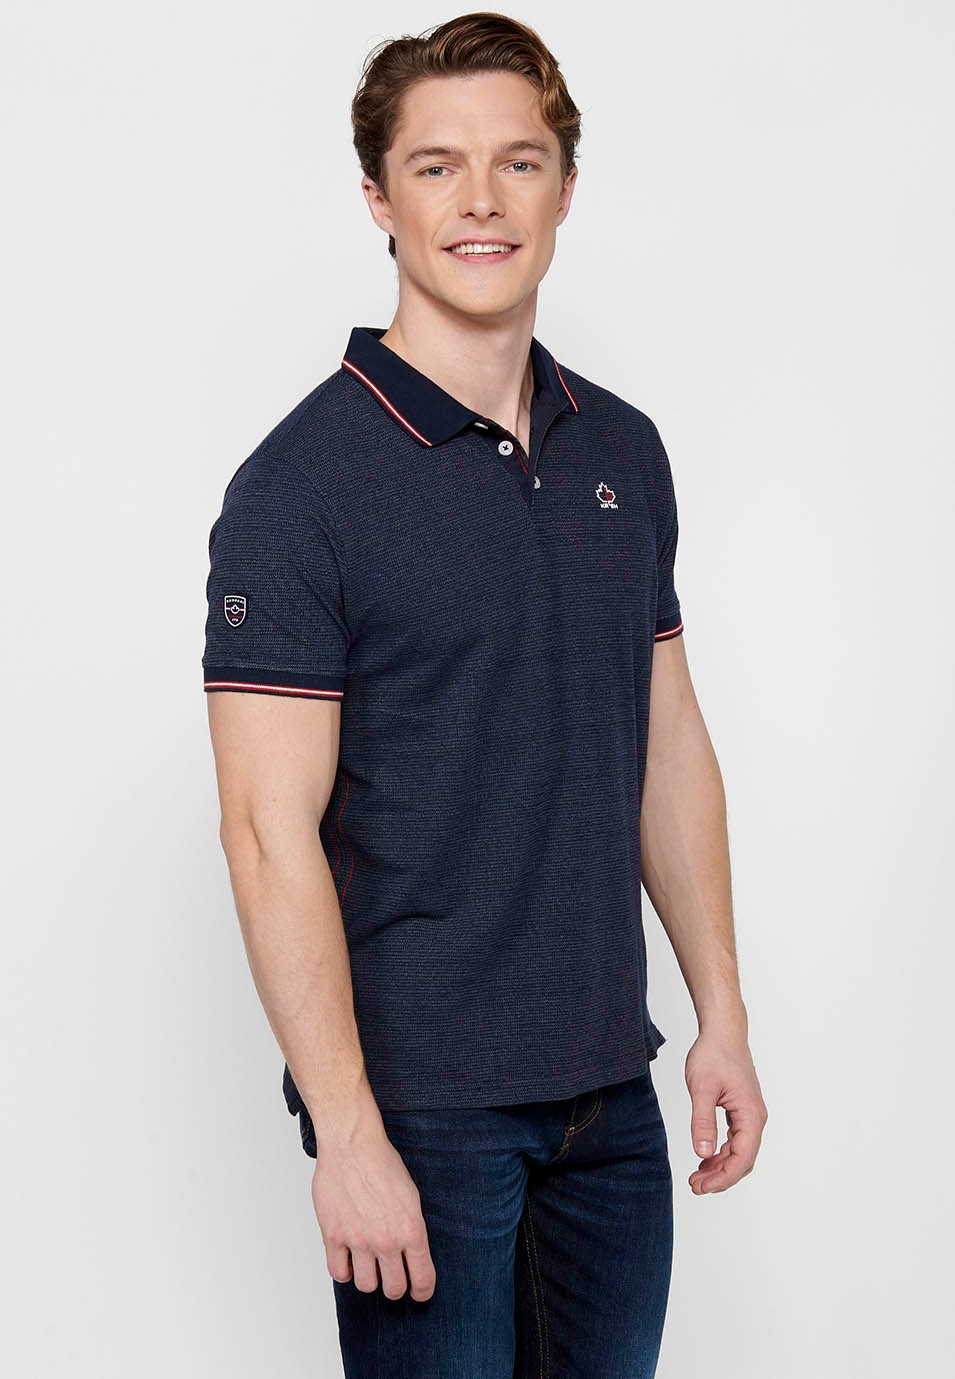 Short-sleeved polo shirt with shirt collar with buttons in Navy Color for Men